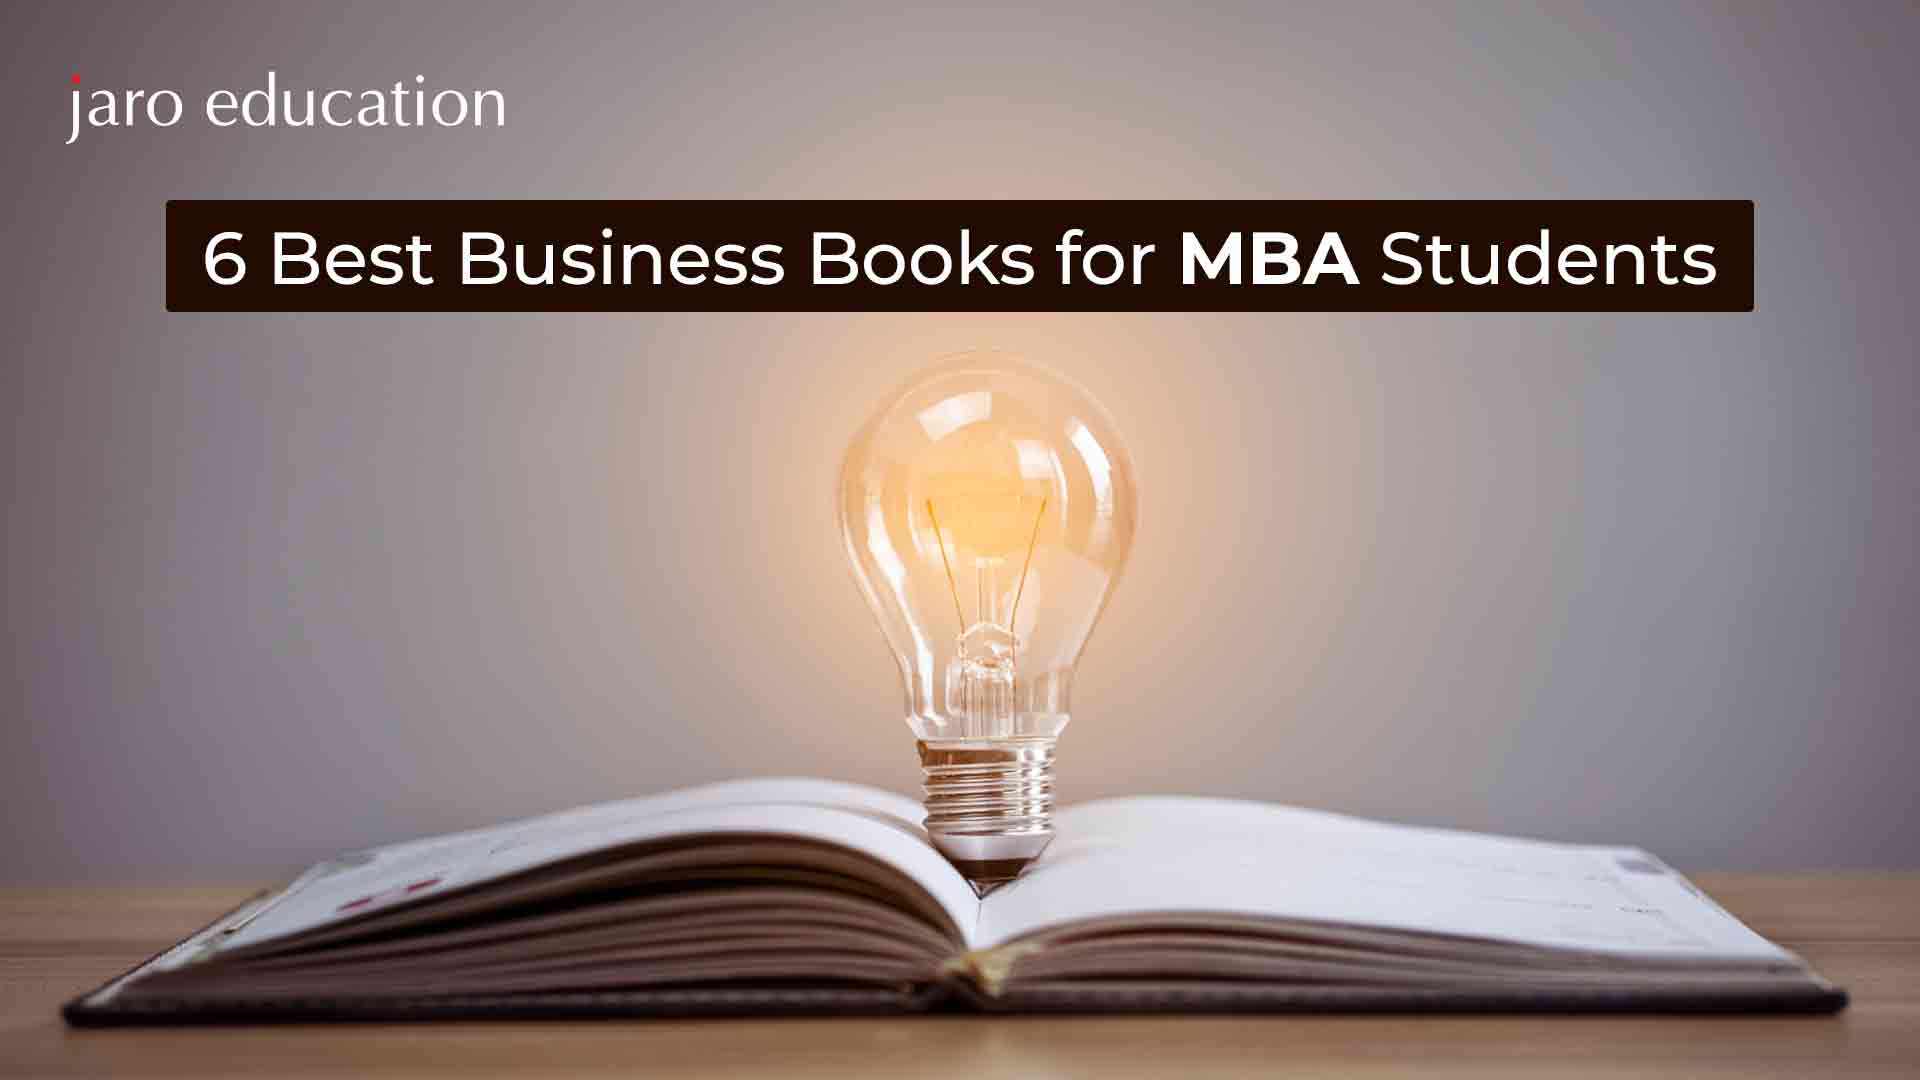 6 Best Business Books for MBA Students - Jaro